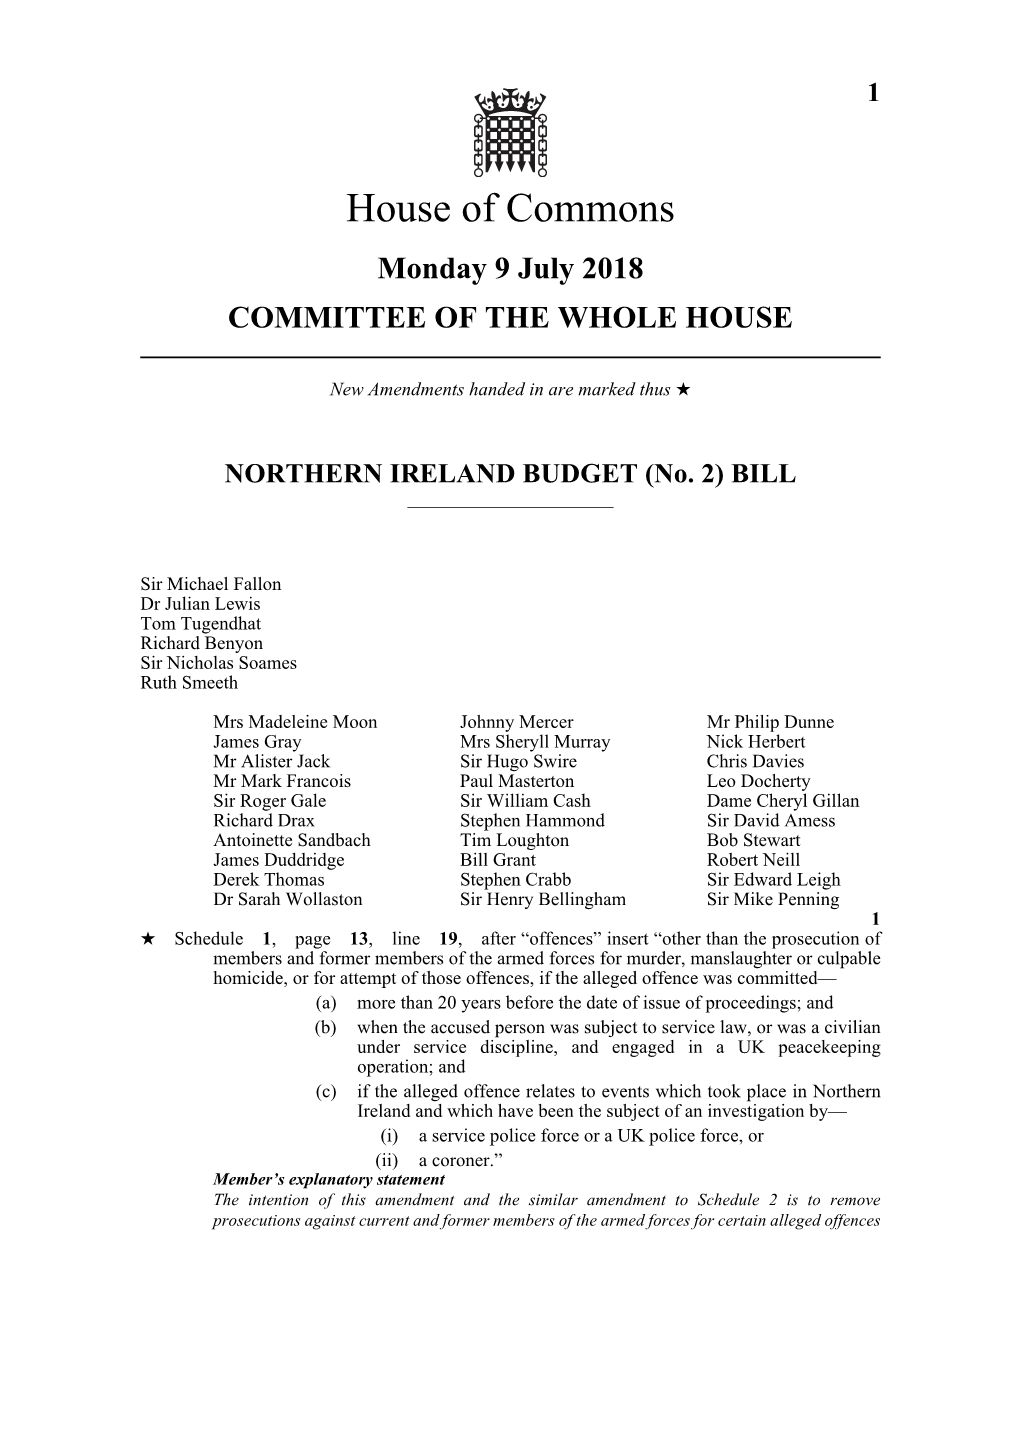 House of Commons Monday 9 July 2018 COMMITTEE of the WHOLE HOUSE